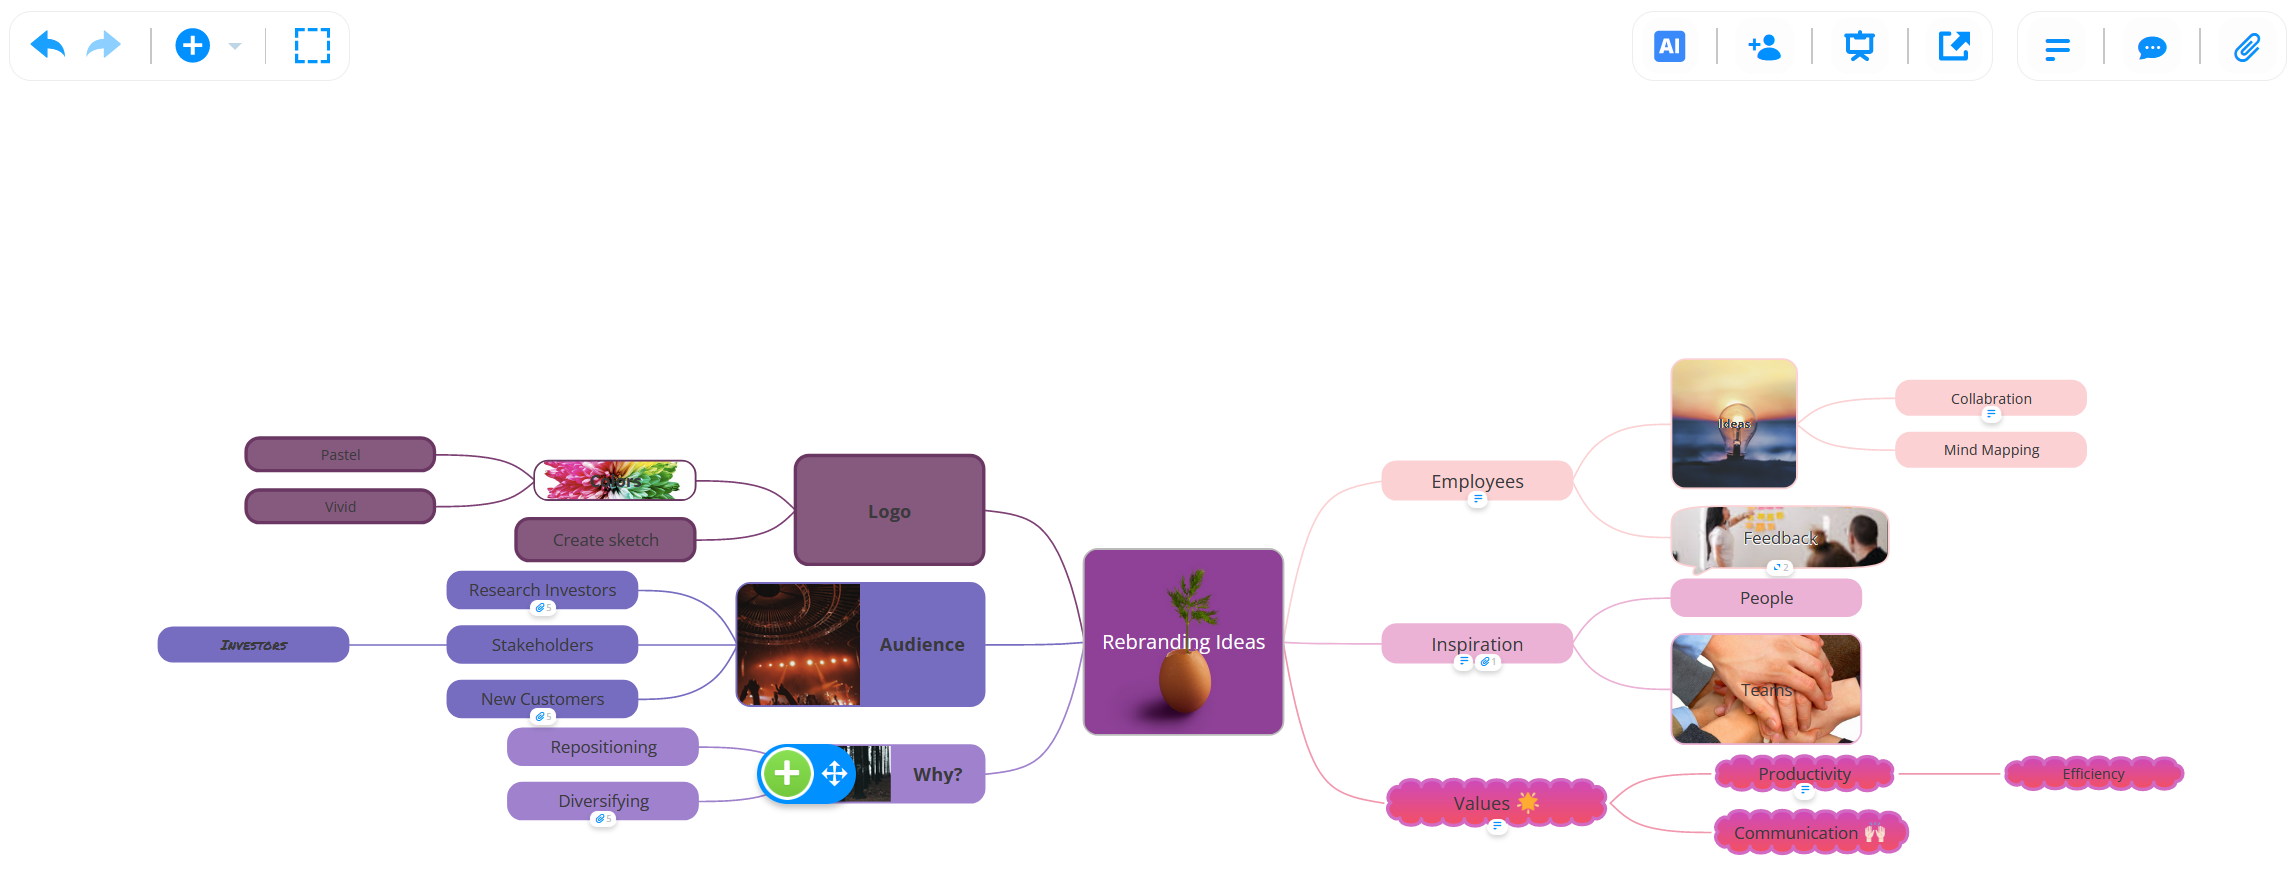 View of the mind map.